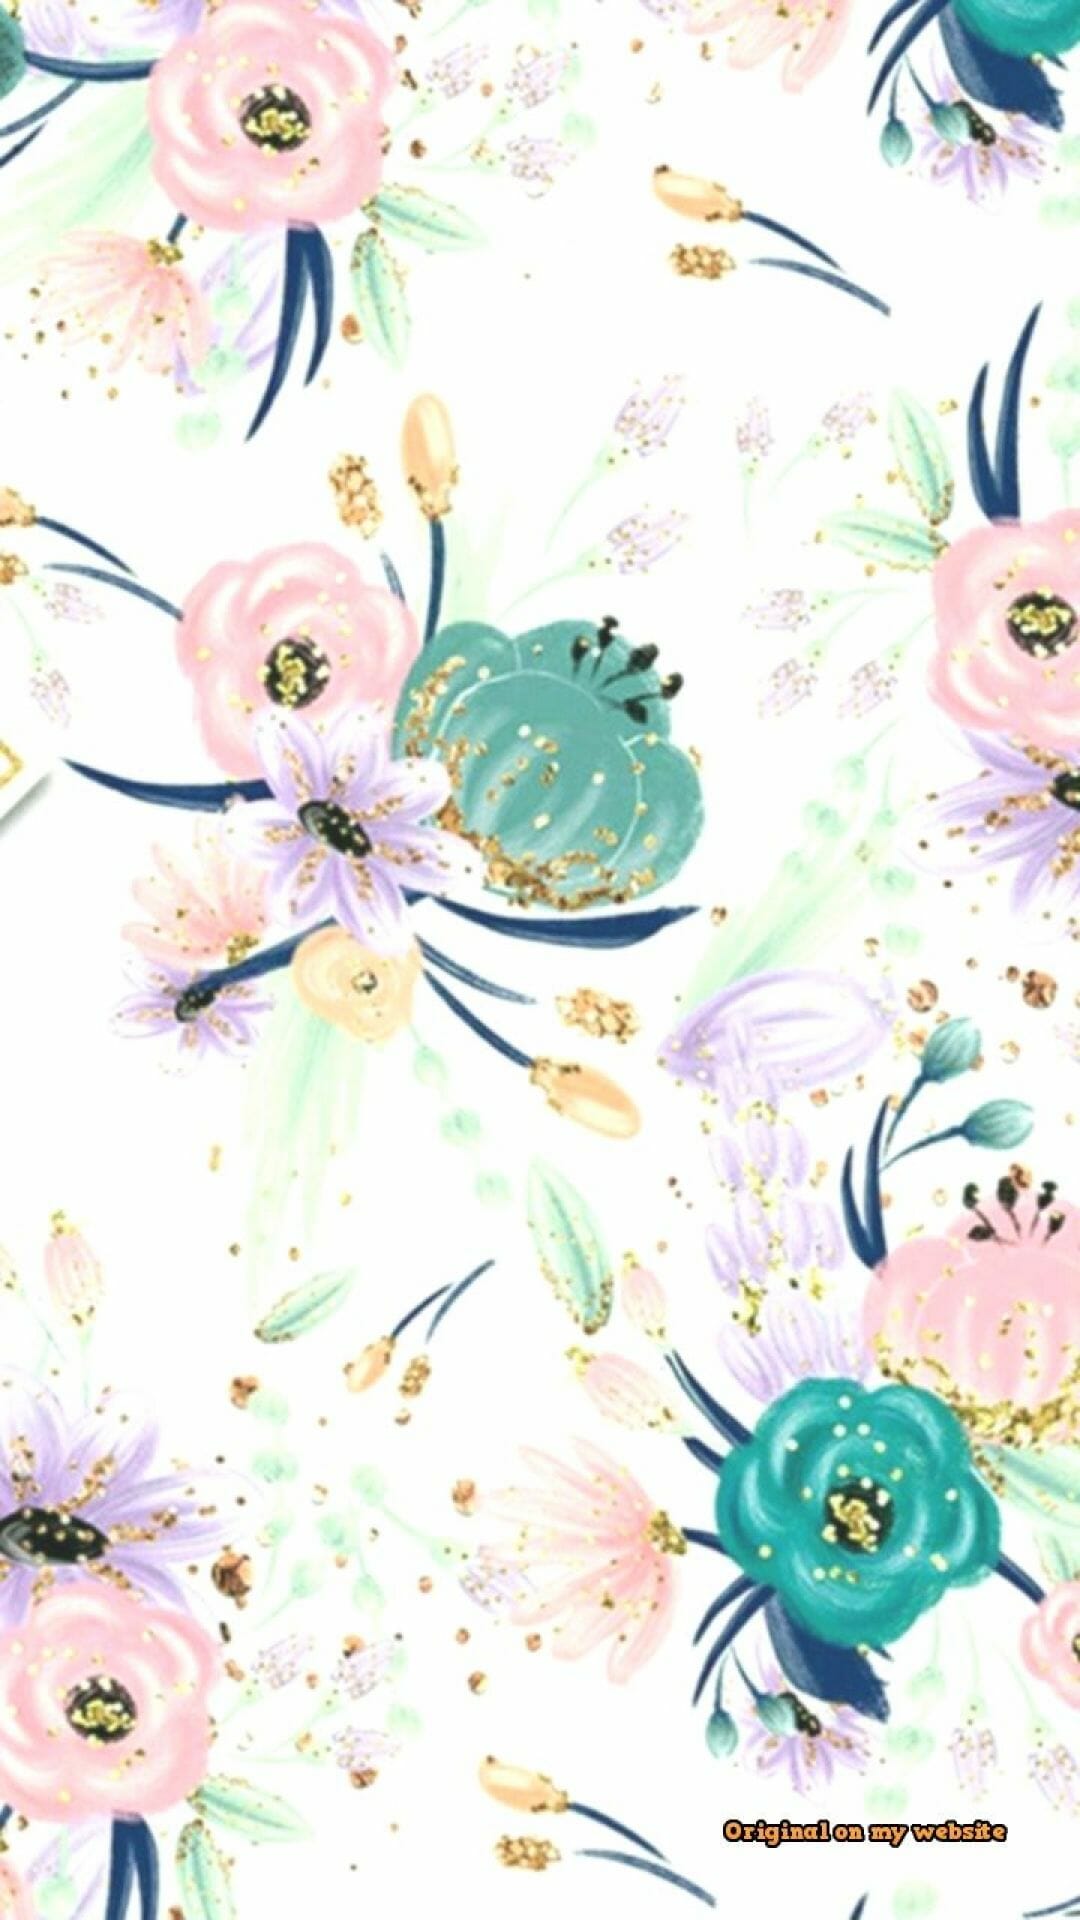 Wallpaper iPhone Aesthetic Spring Flower Pattern / iPhone HD Wallpaper Background Download HD Wallpaper (Desktop Background / Android / iPhone) (1080p, 4k) (1080x1920)